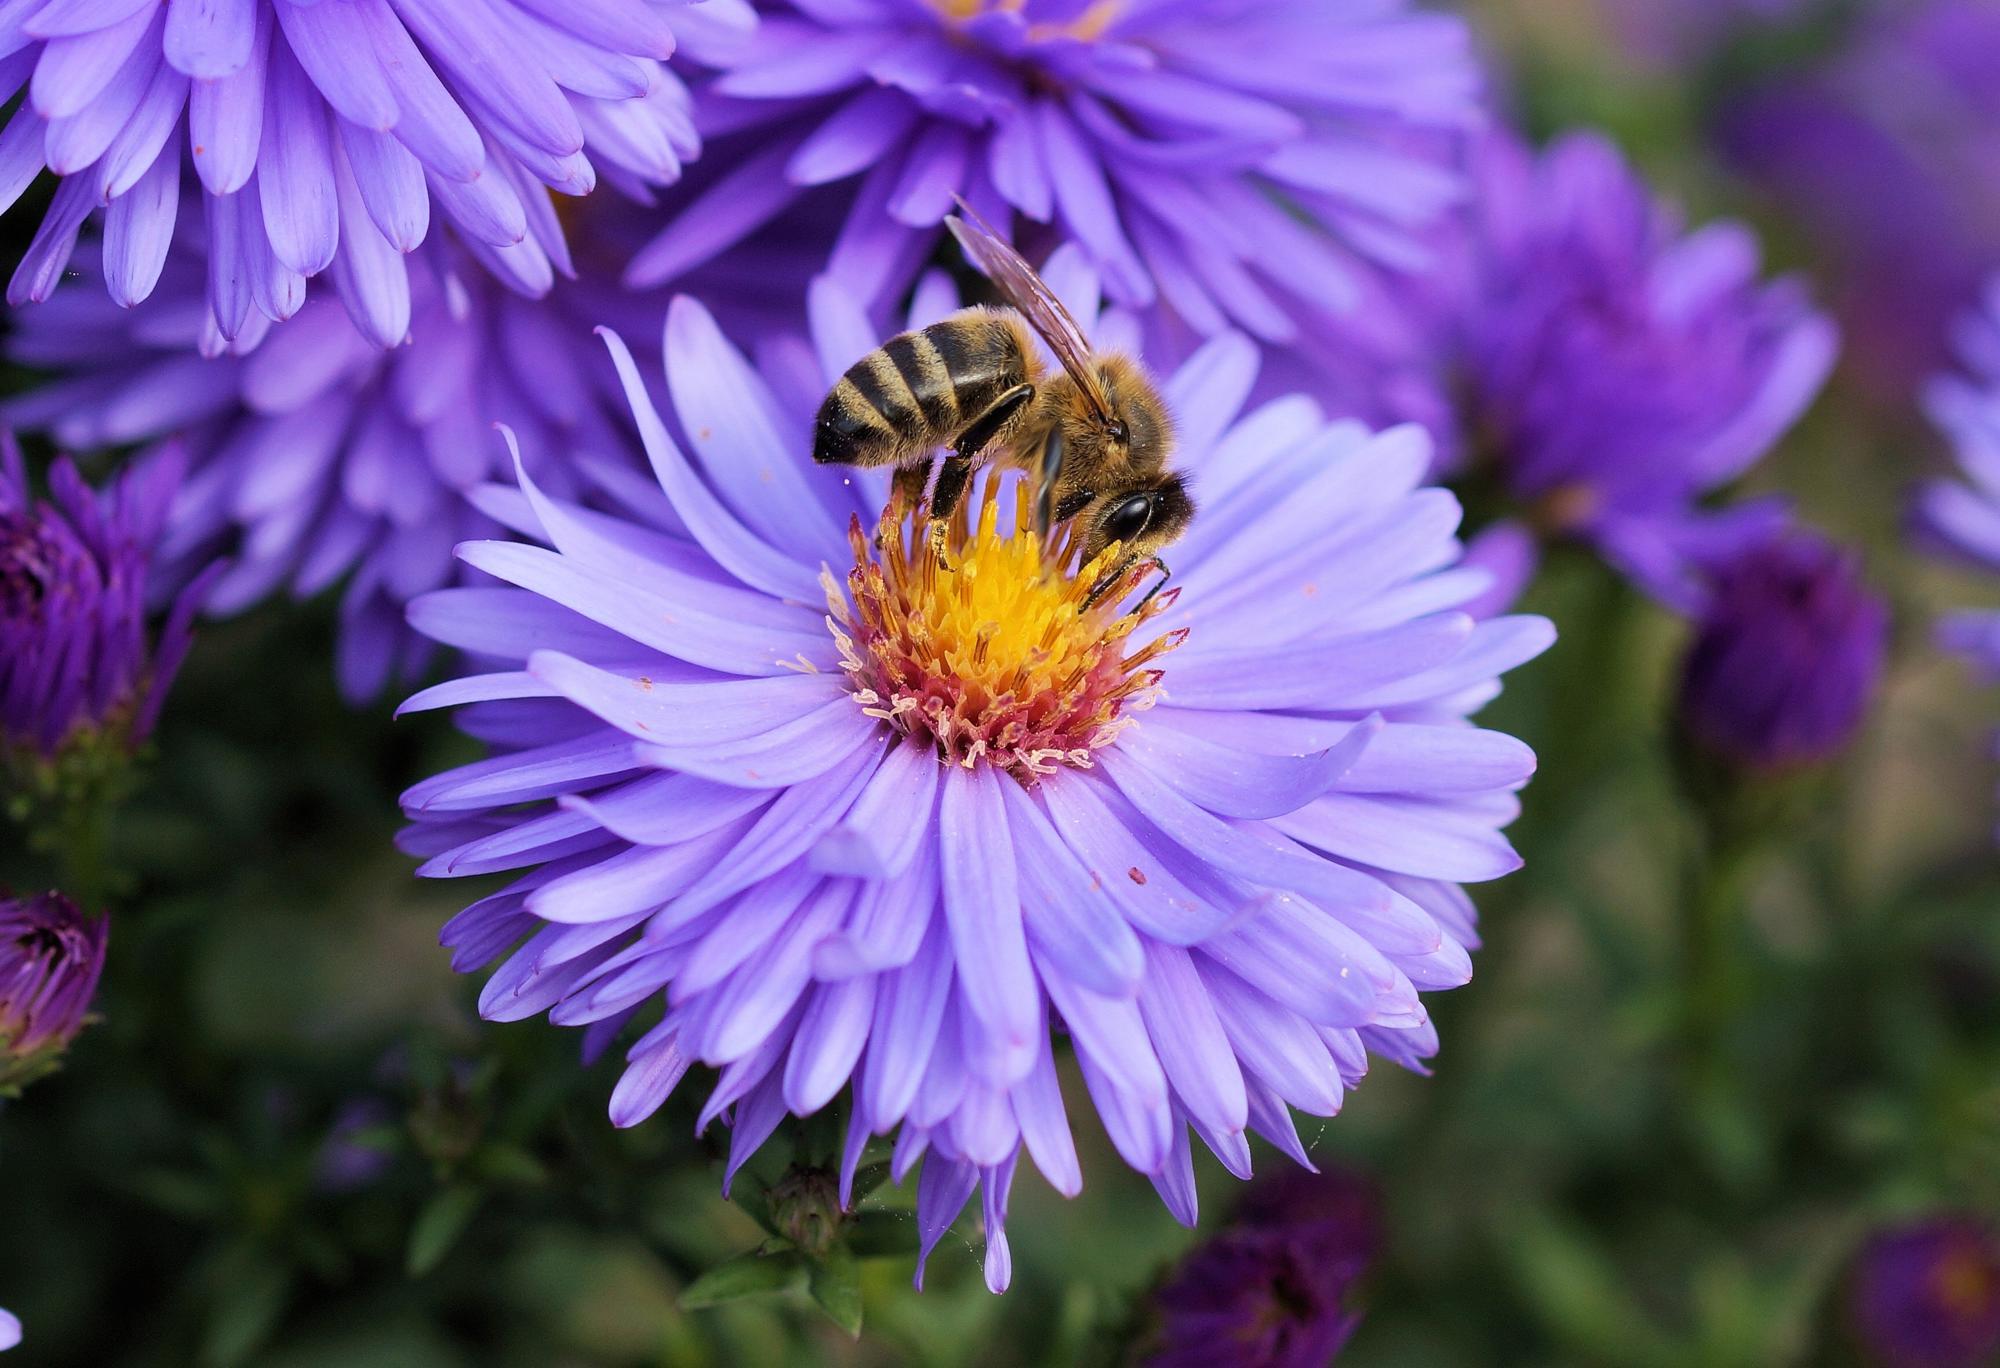 Bees struggle to find flowers because of air pollution